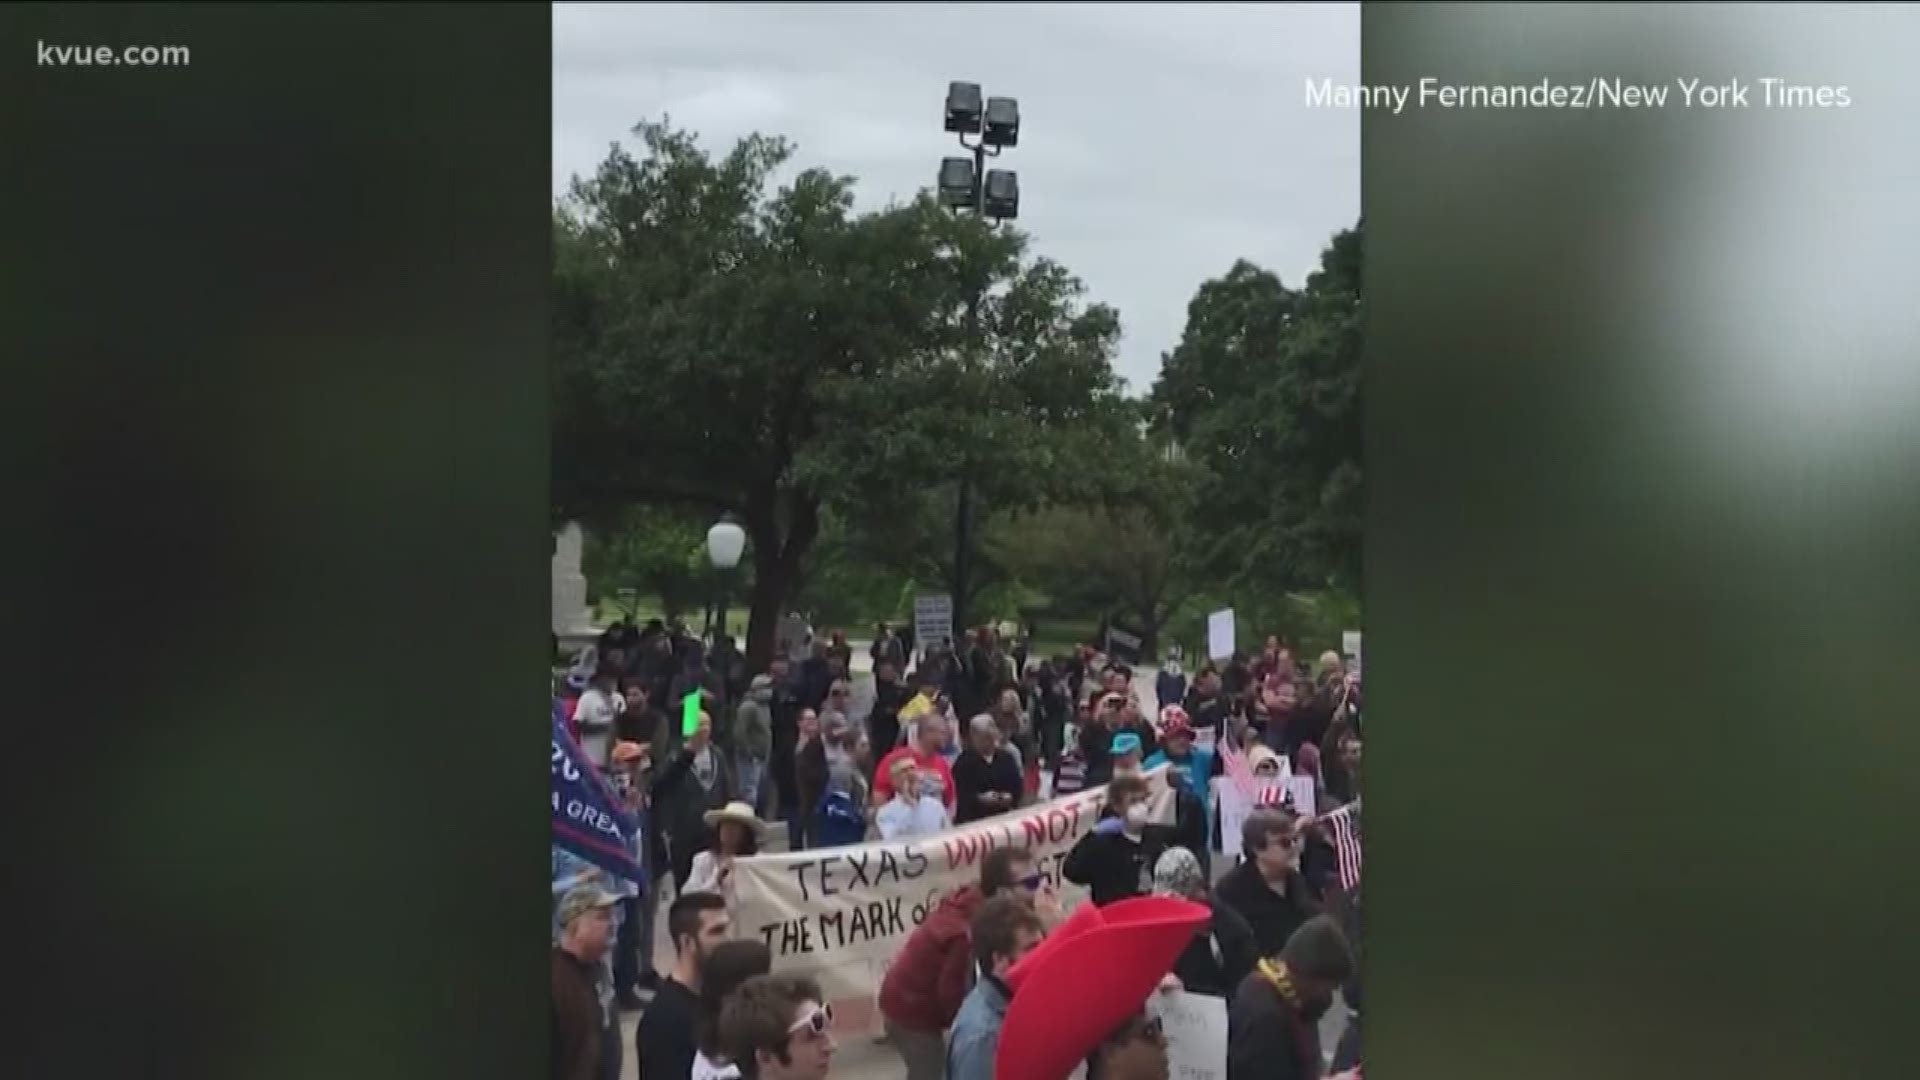 Just a day after the governor rolled out a plan to gradually get things back to normal in Texas, protesters say it's not soon enough.